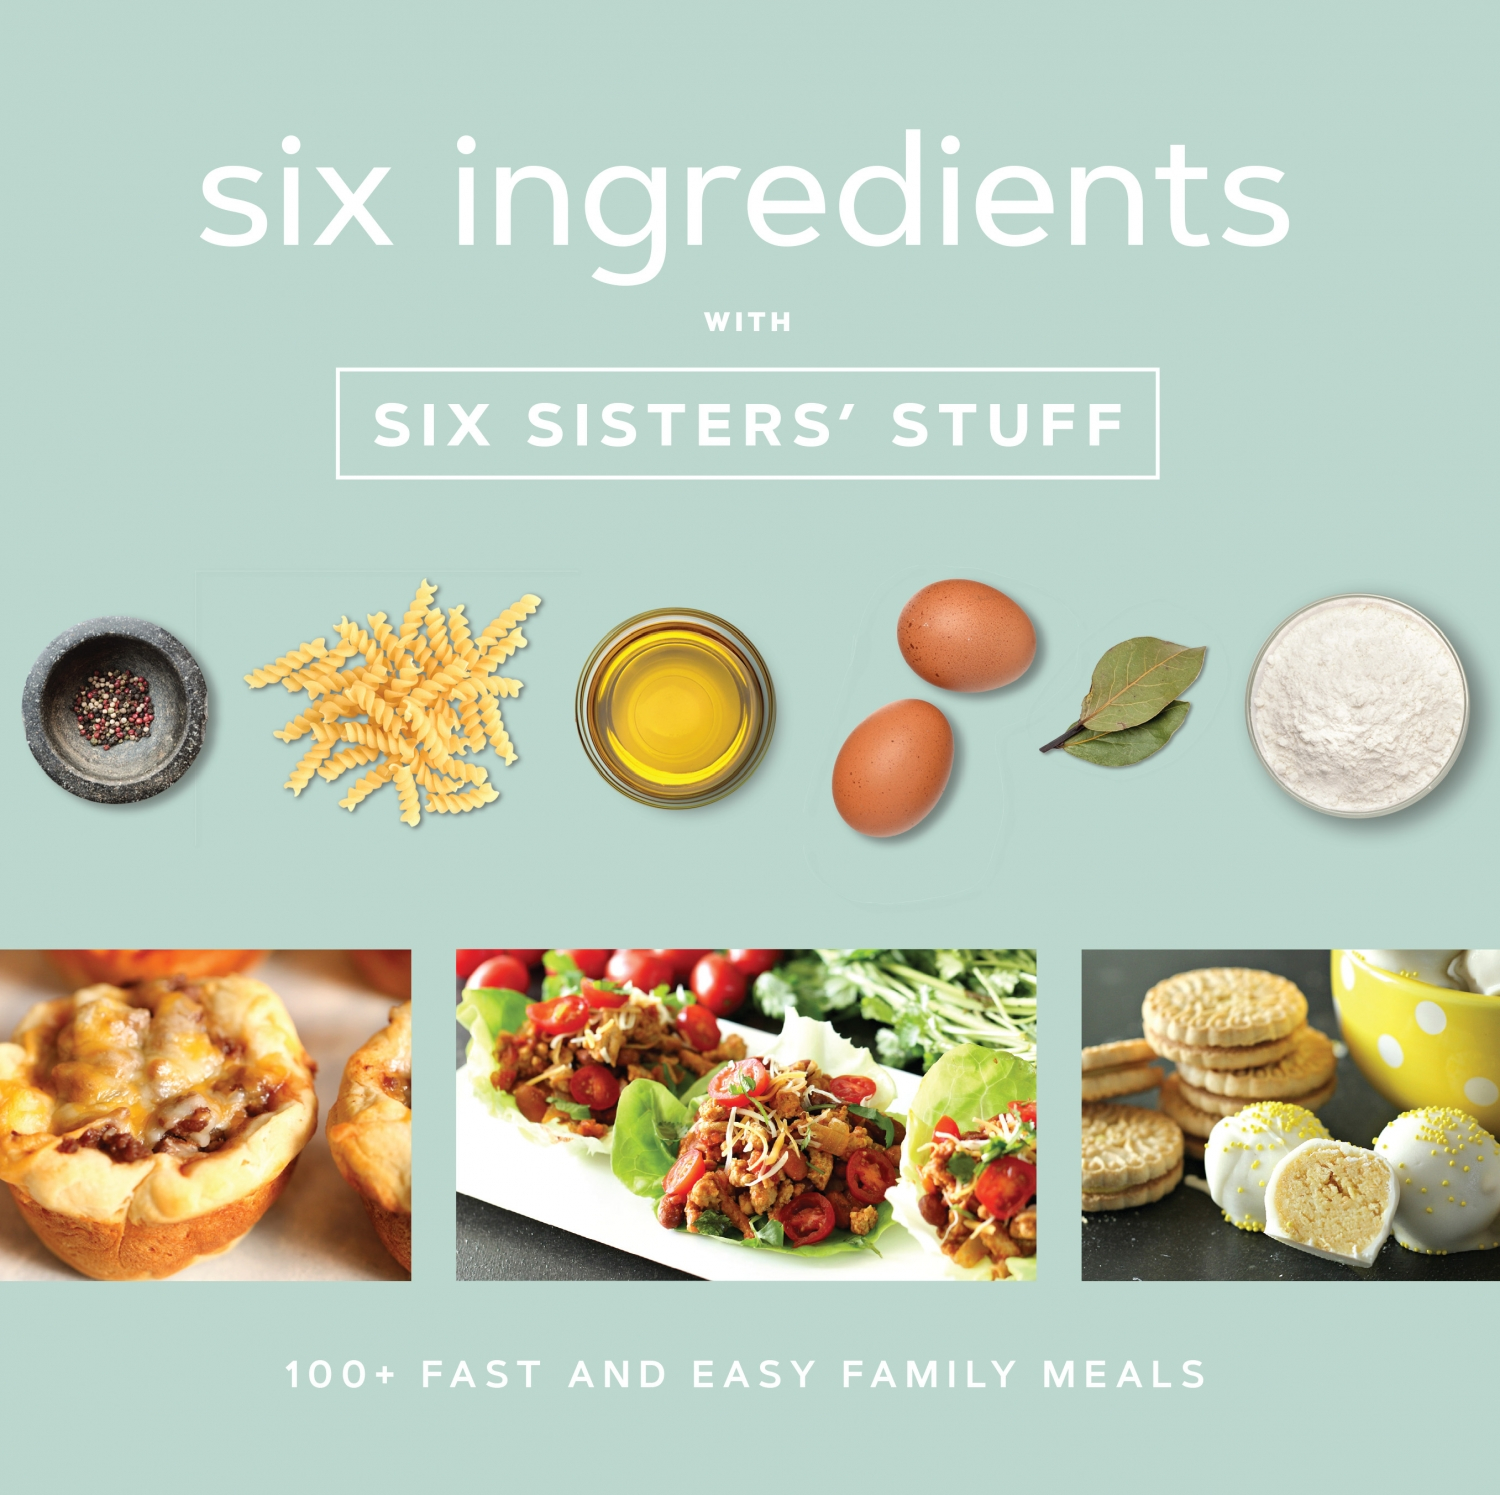 Review Of Six Ingredients With Six Sisters Stuff 9781629725994 — Foreword Reviews